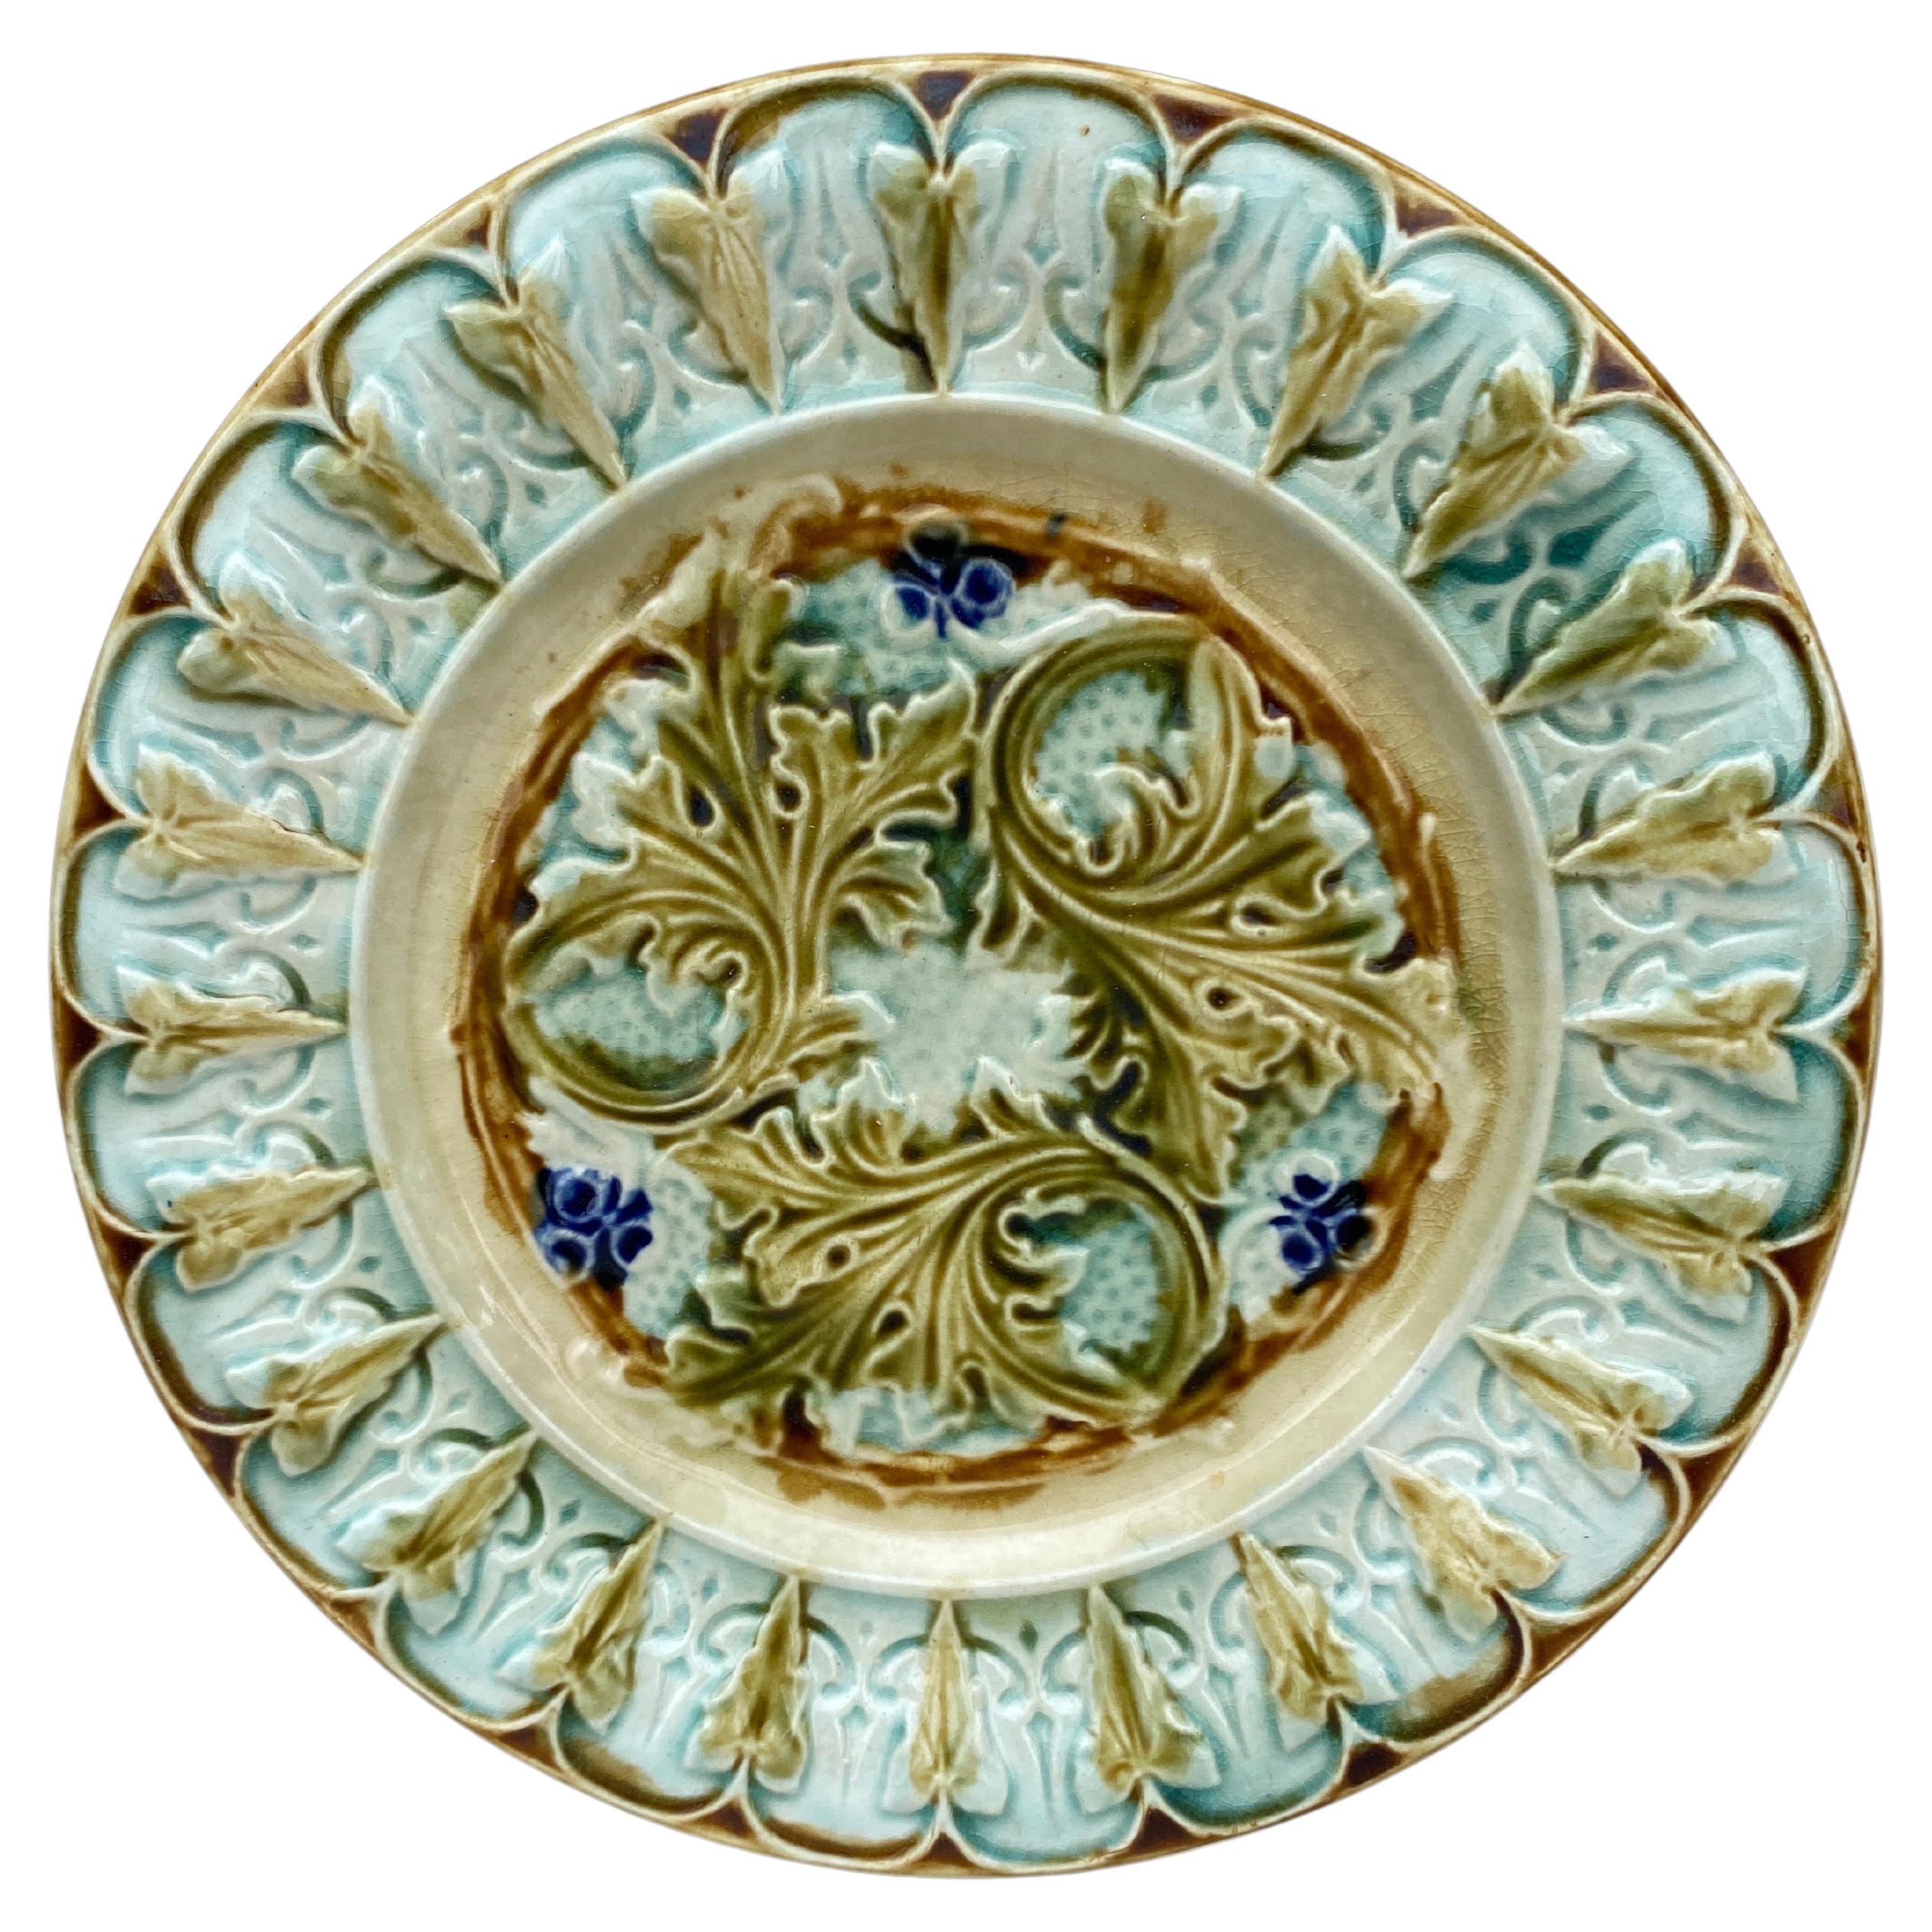 French Green Majolica Acanthus Leaves Plate, circa 1880